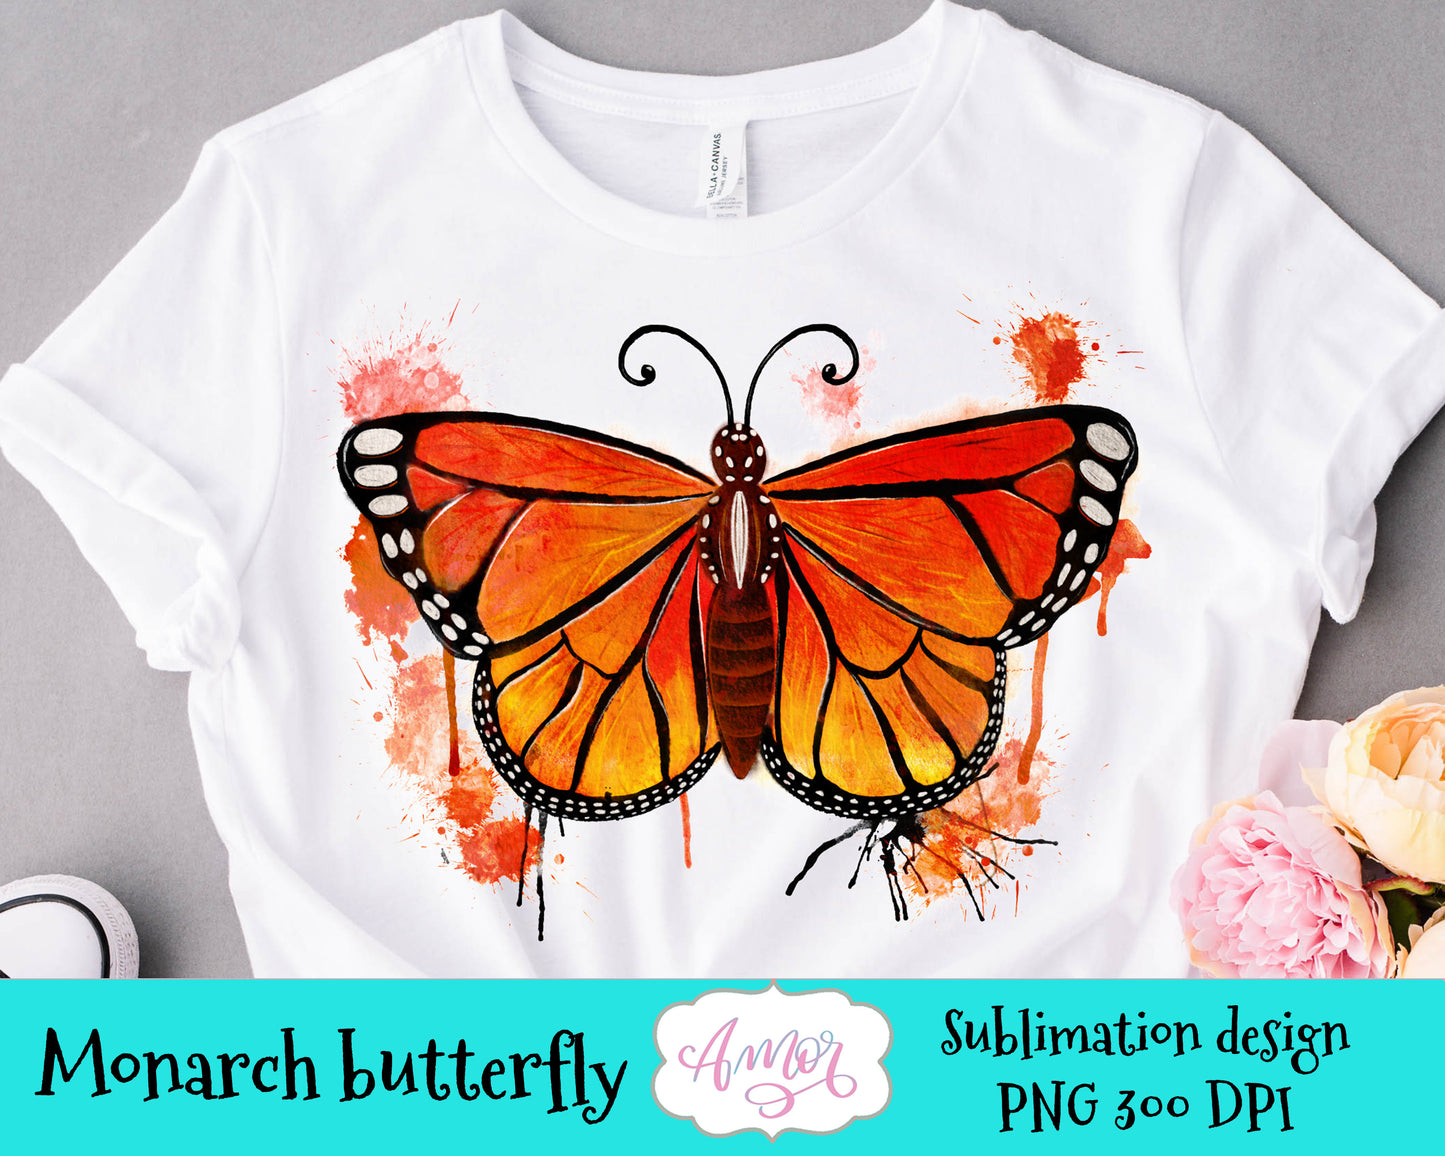 Monarch Butterfly sublimation design for T-shirts